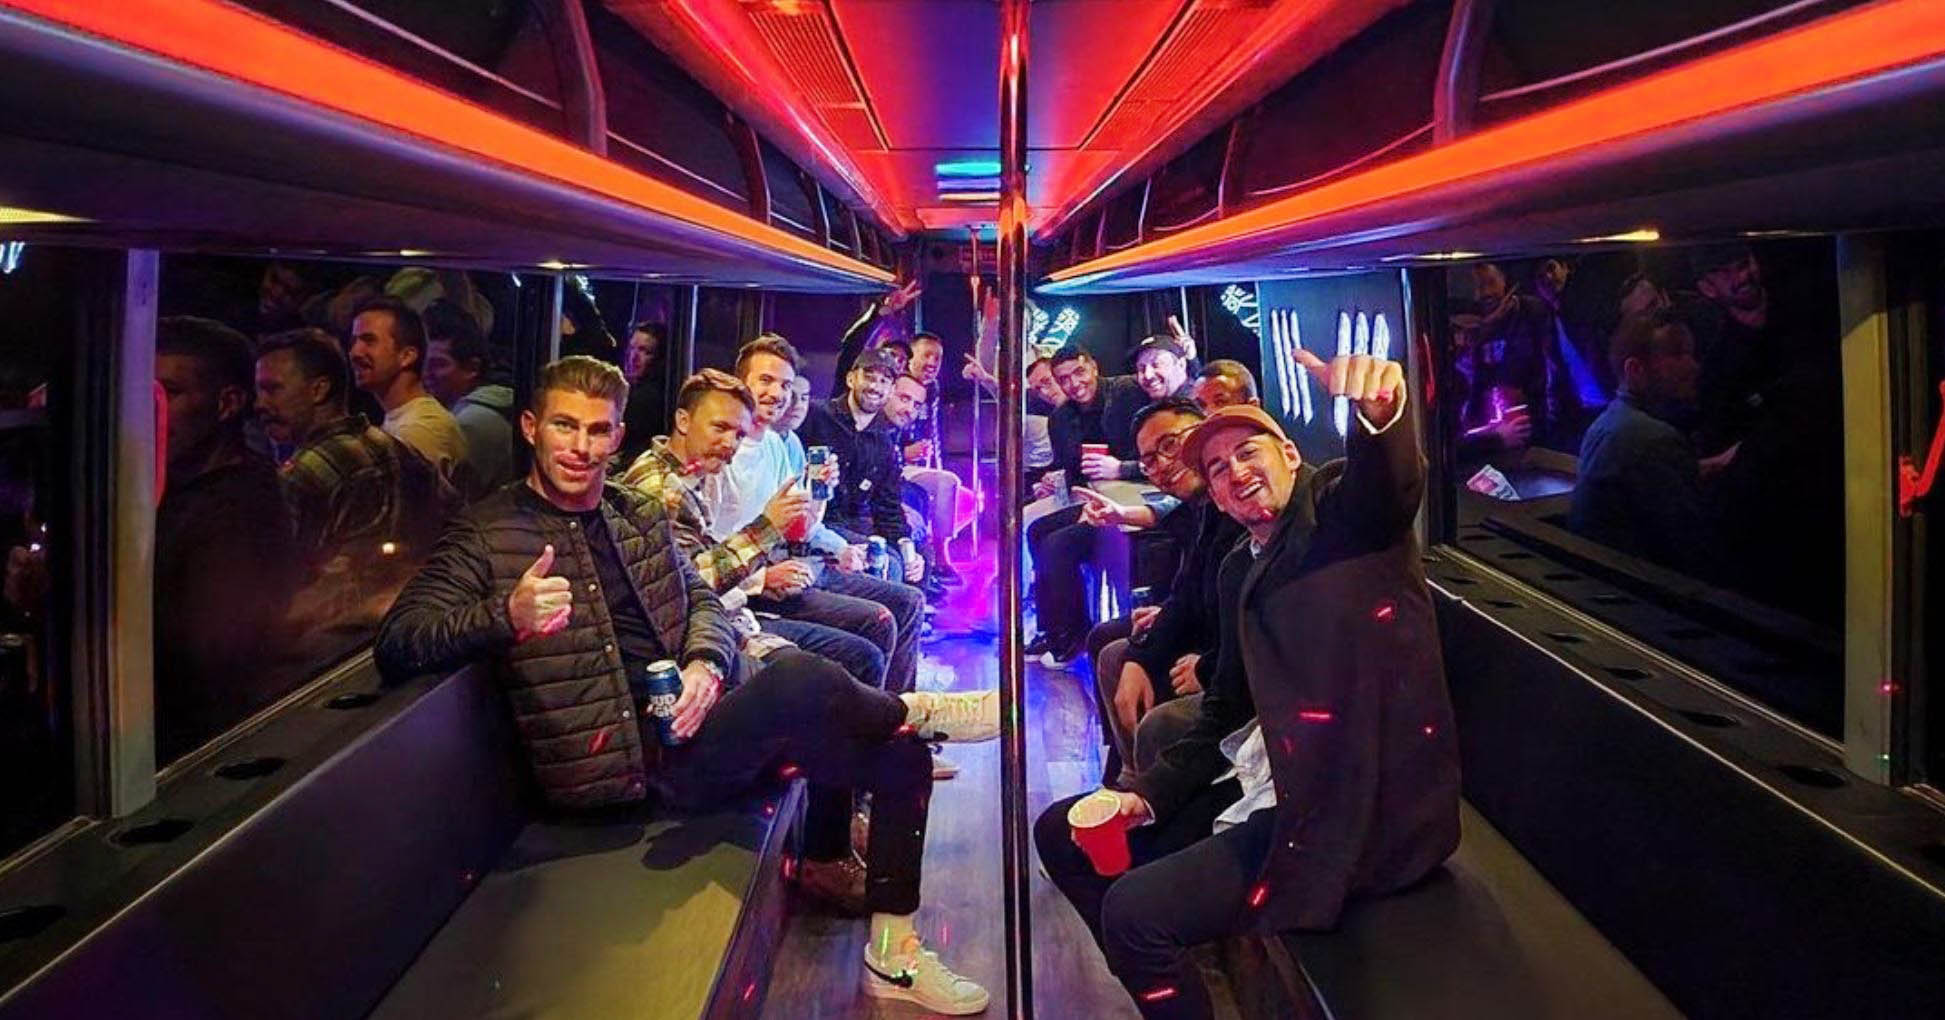 Bachelor Party starting on the party Bus